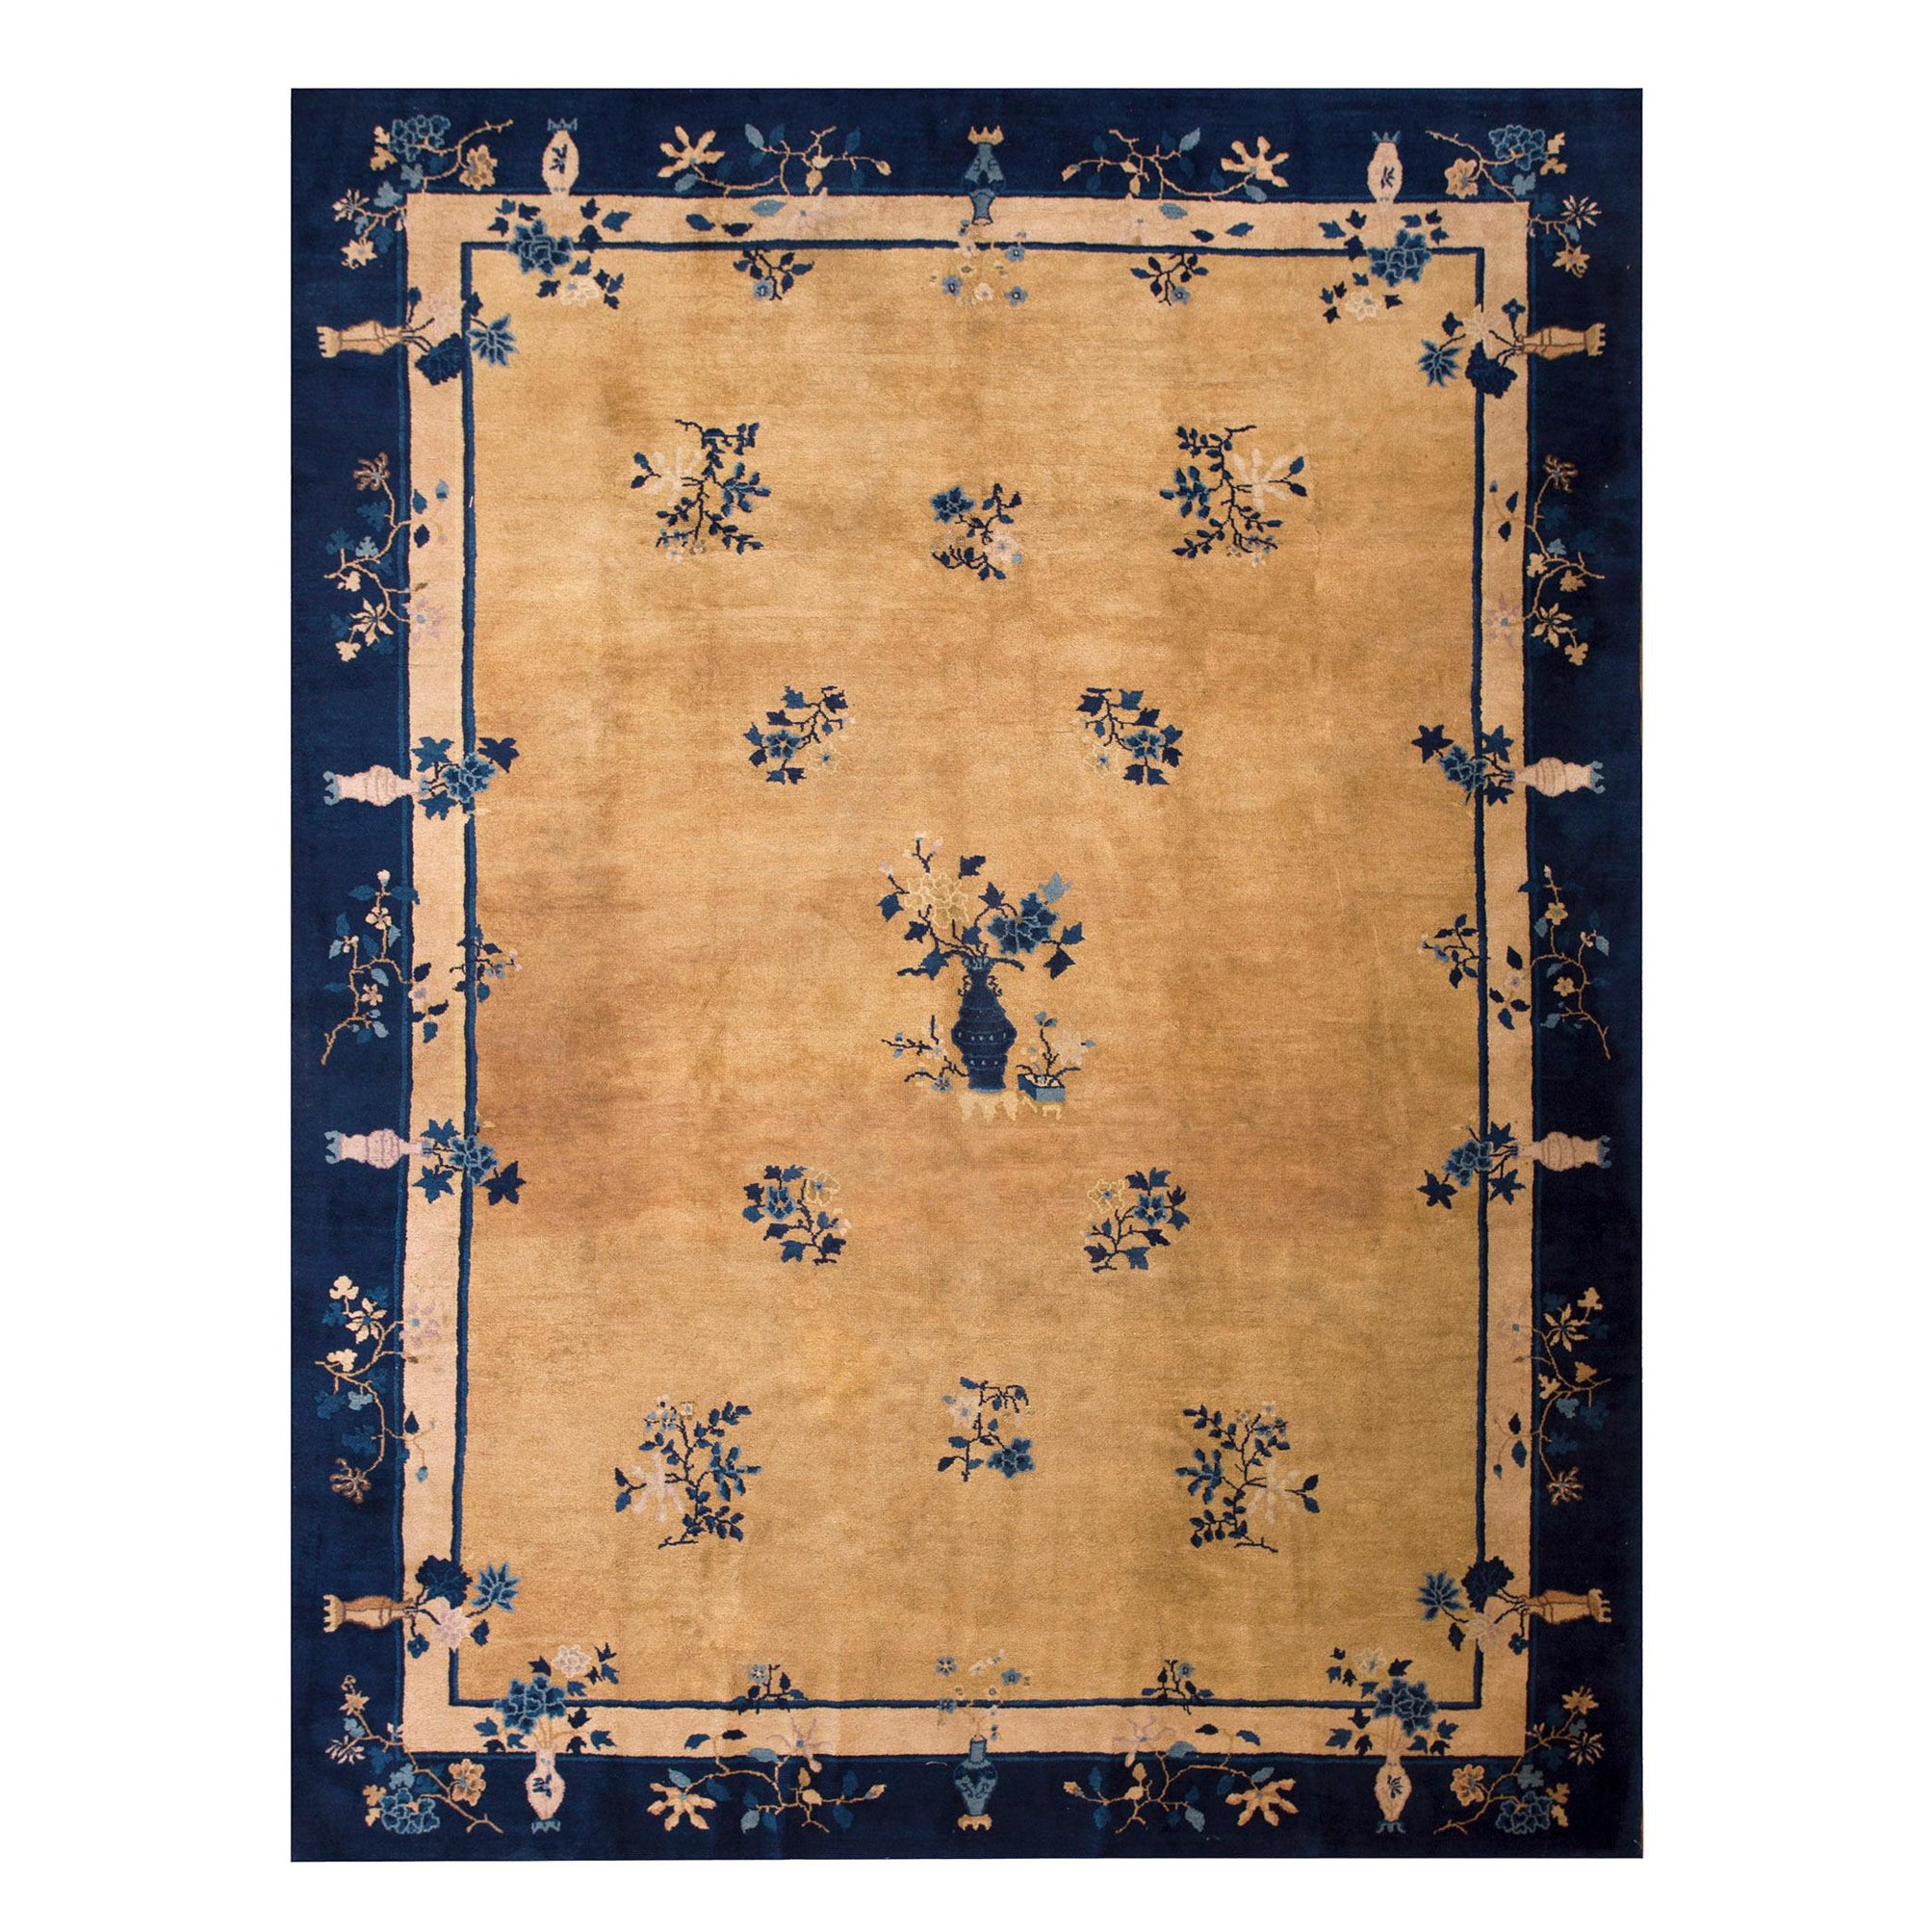 Early 20th Century Chinese Peking Carpet ( 9'2" x 11'10" - 279 x 361 ) For Sale